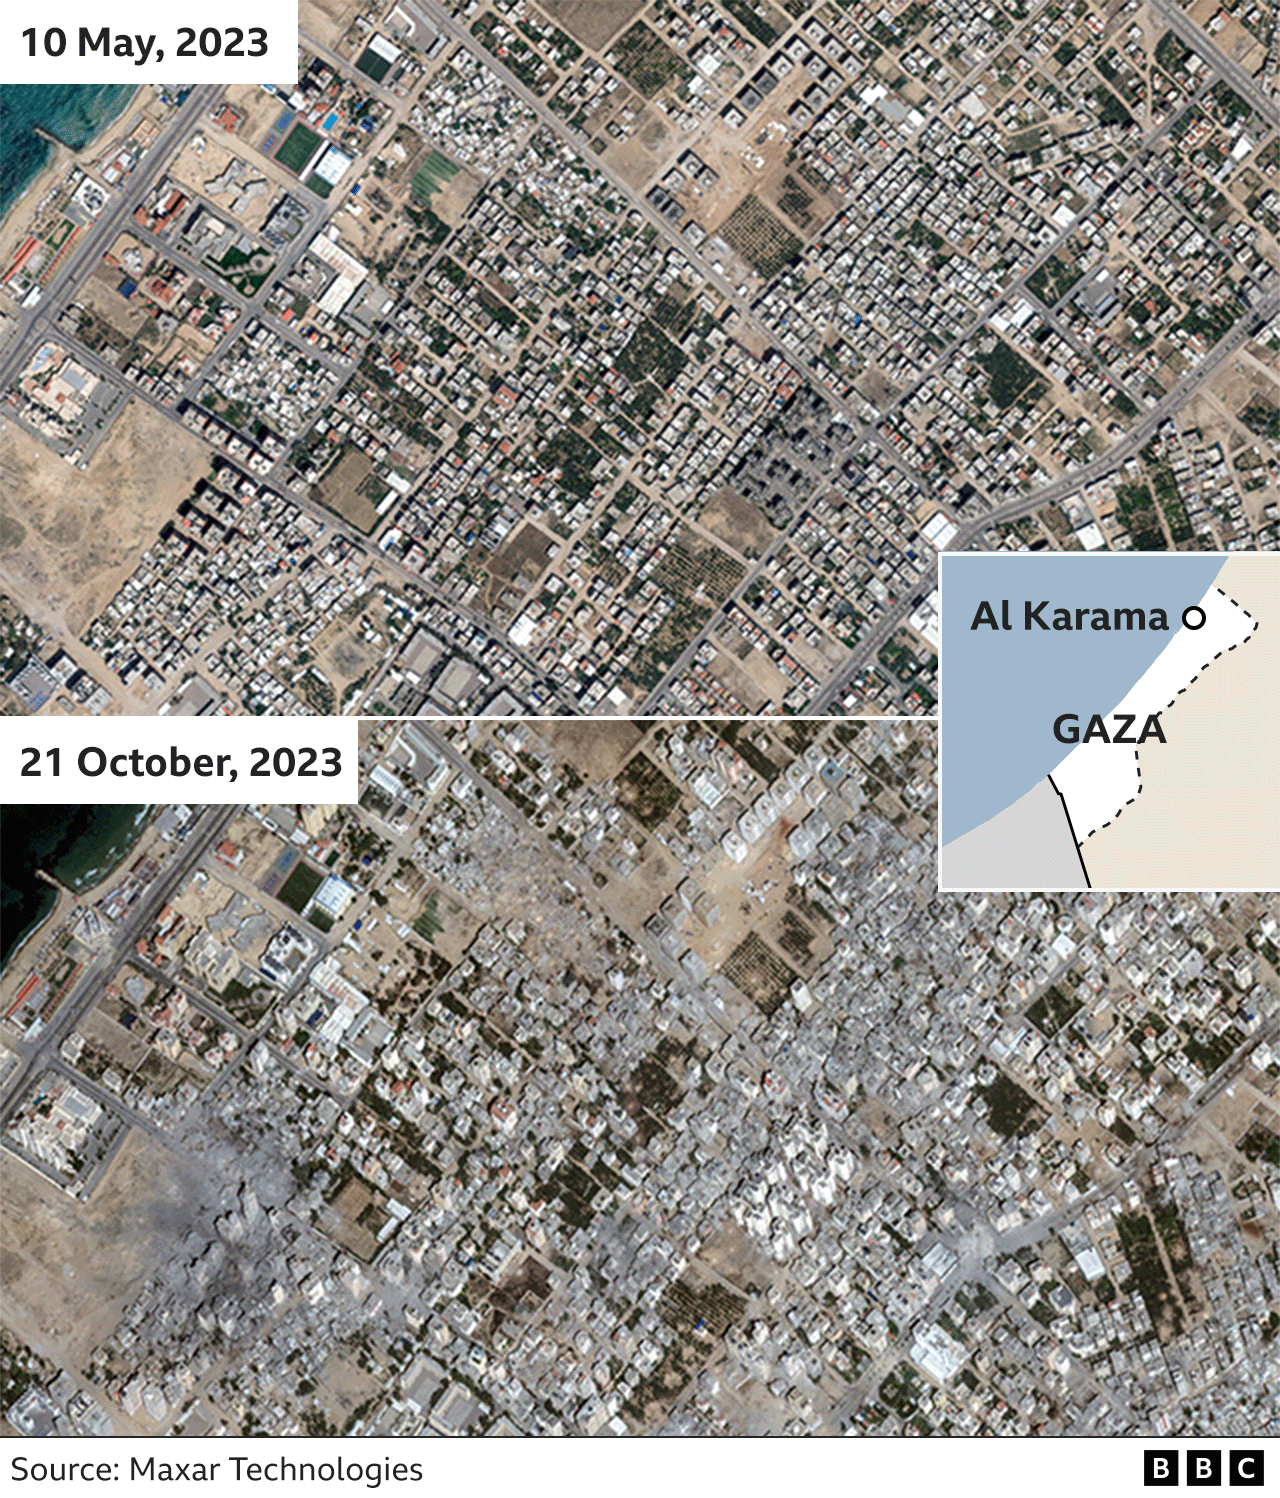 Satellite images of Al Karama in Gaza, showing the area before and after Israeli aerial attacks that destroyed several buildings